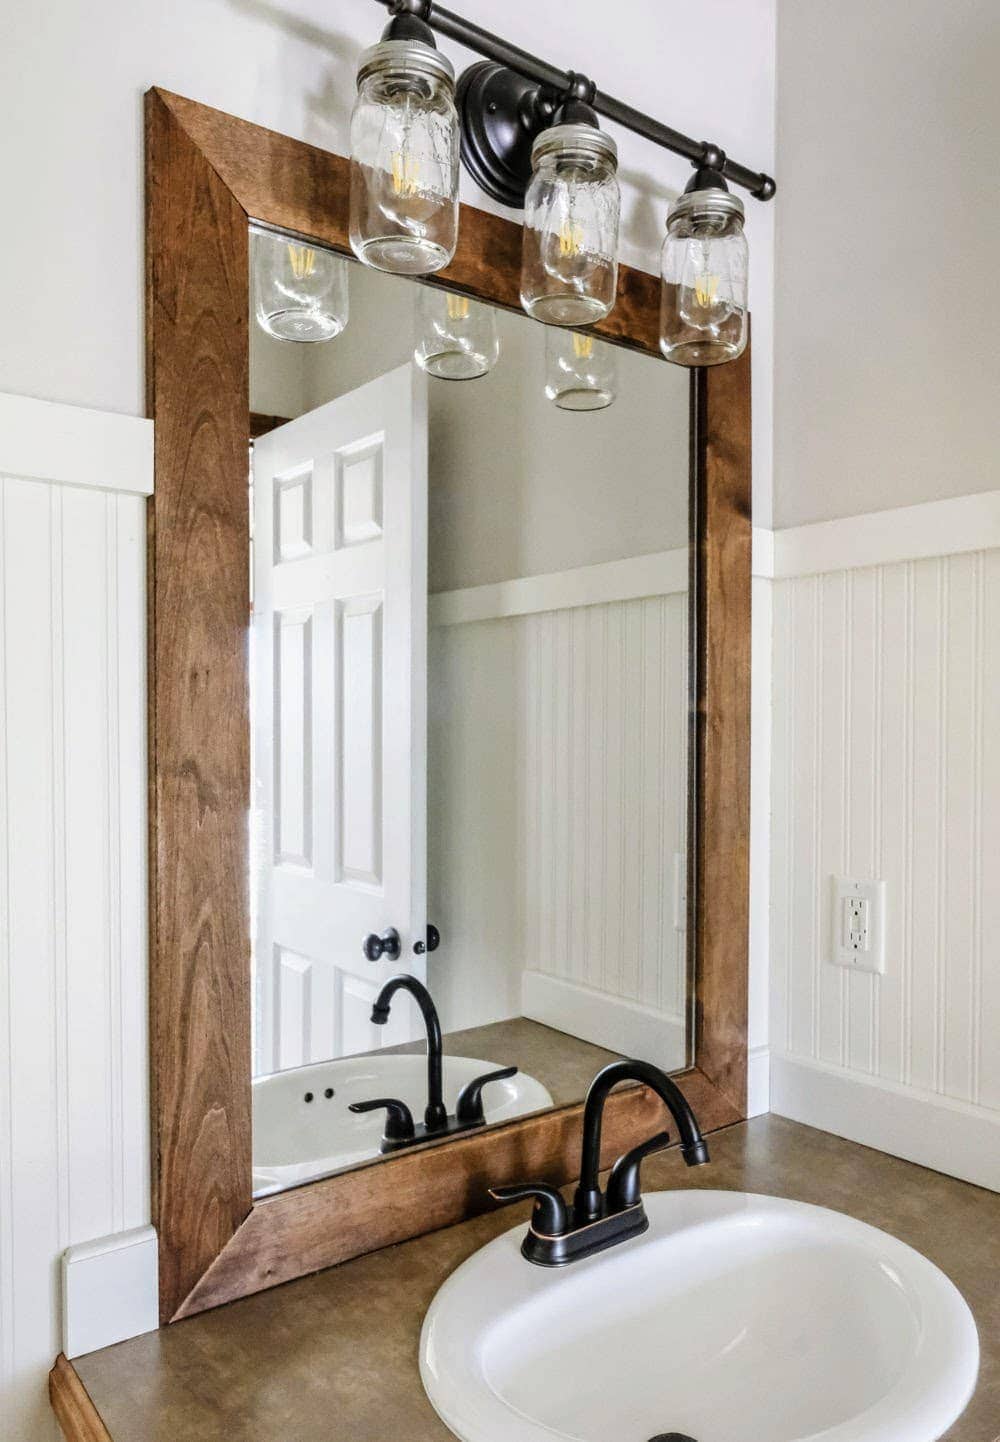 8 Popular Bathroom Remodel Ideas And Trends For 2020